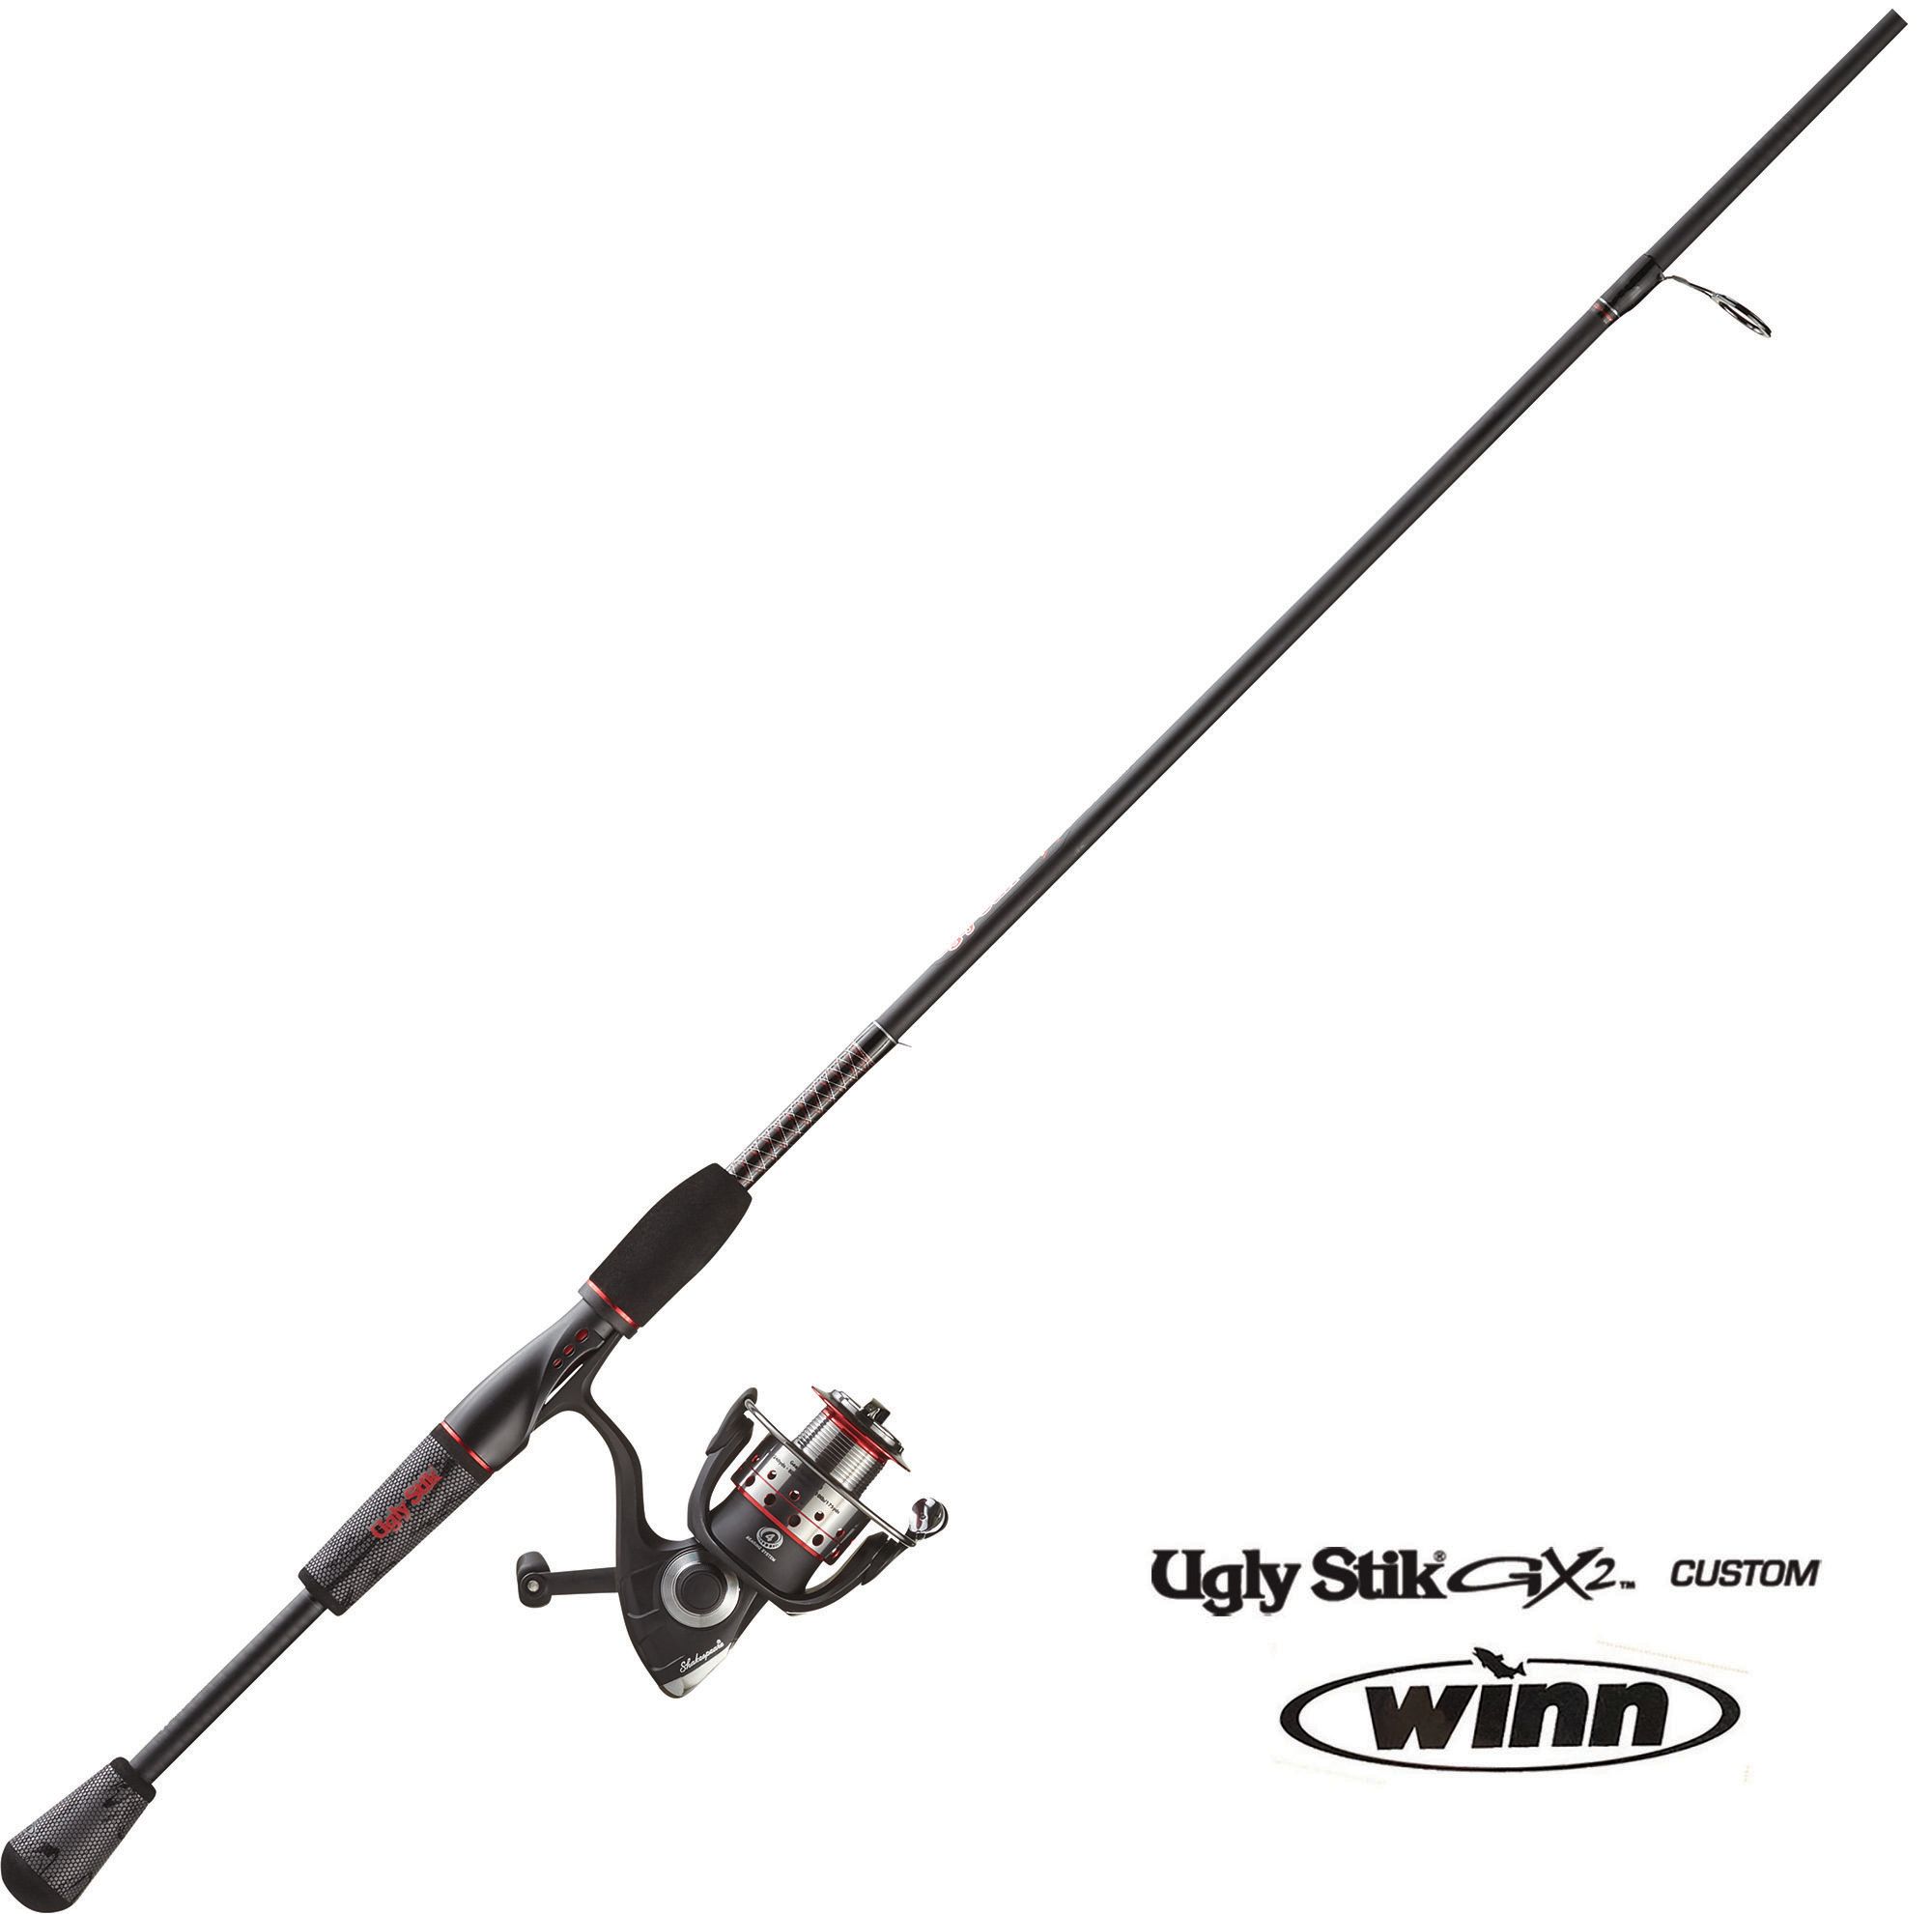 Fishing Deals - Up to 50% Off